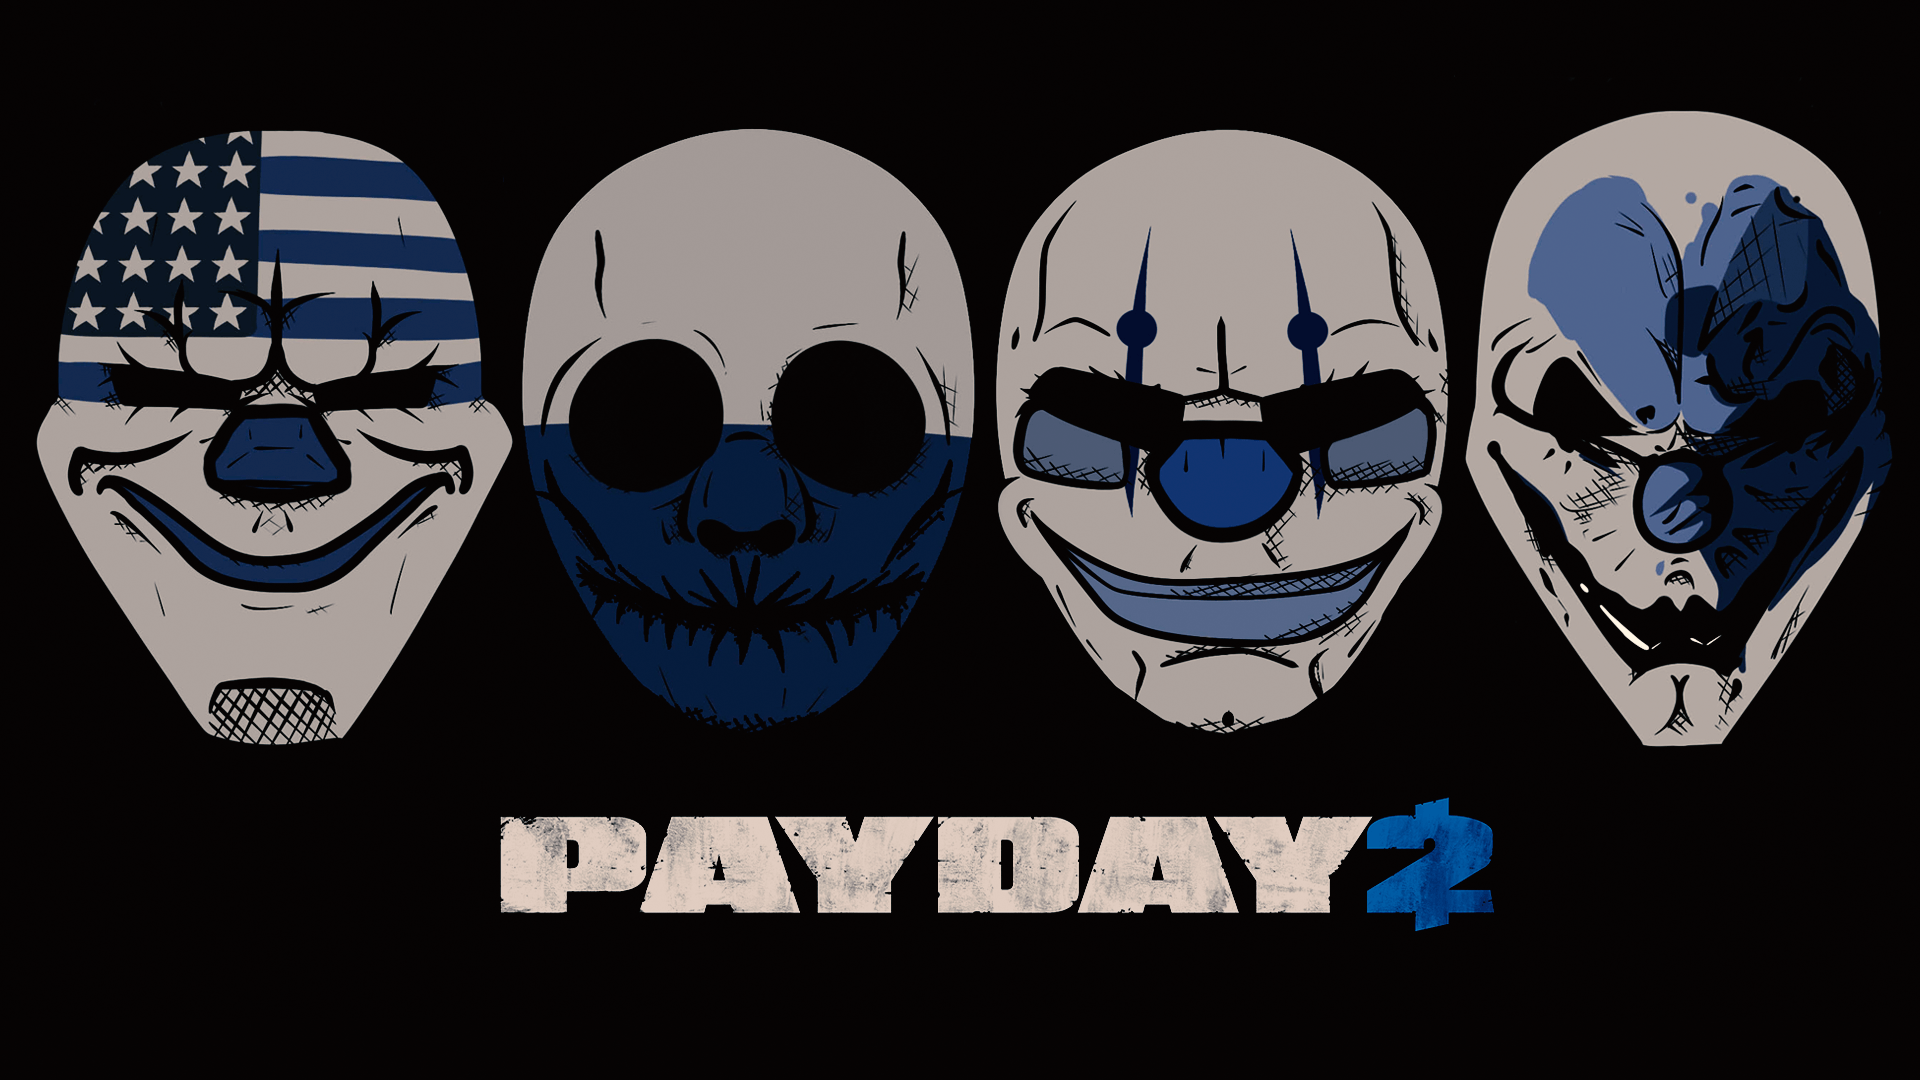 Payday 2 Wallpaper /payday 2